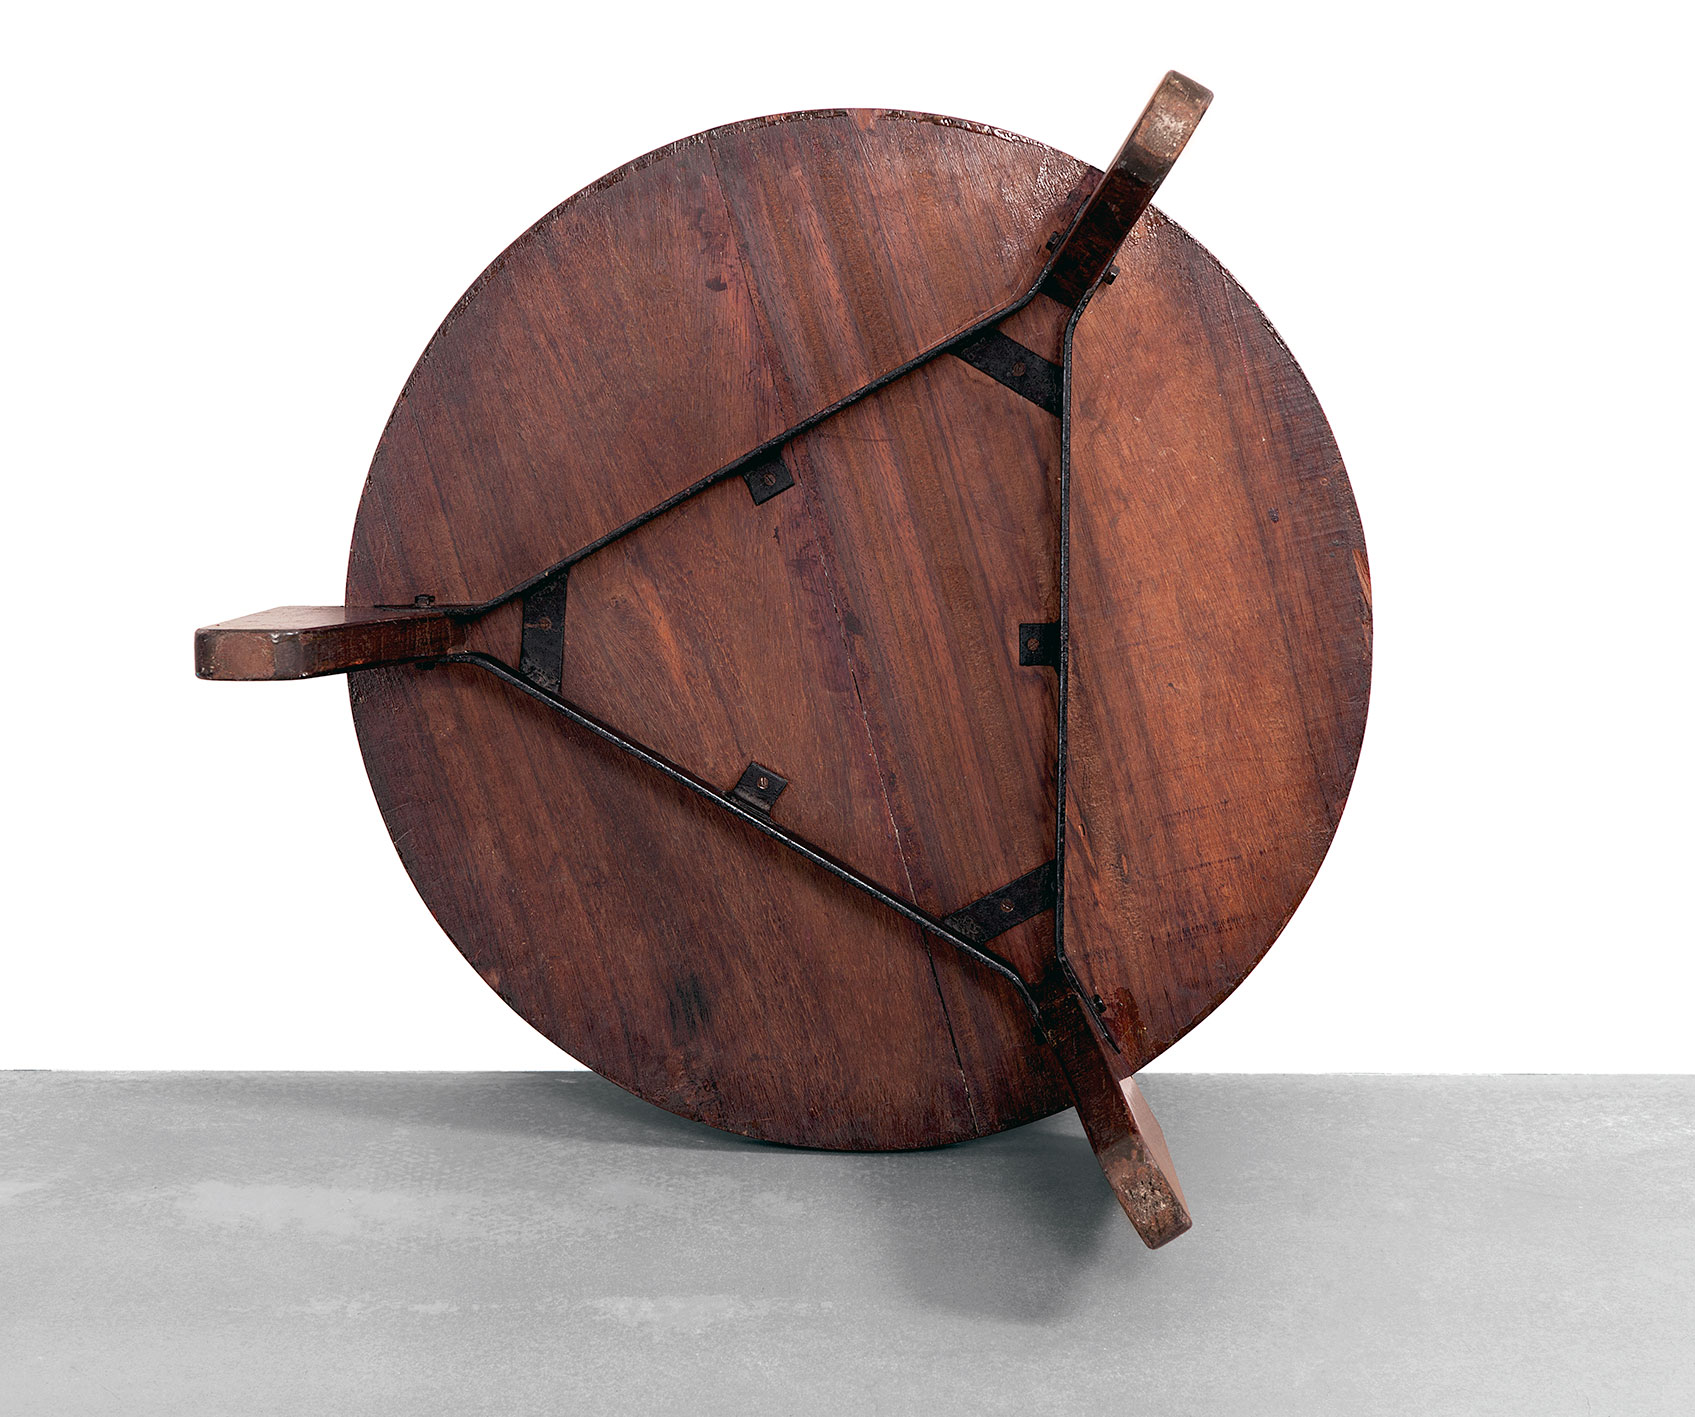 Guéridon bas. Adapted by Charlotte Perriand for the Air France building, Brazzaville, 1952. Solid African wood (kambala).